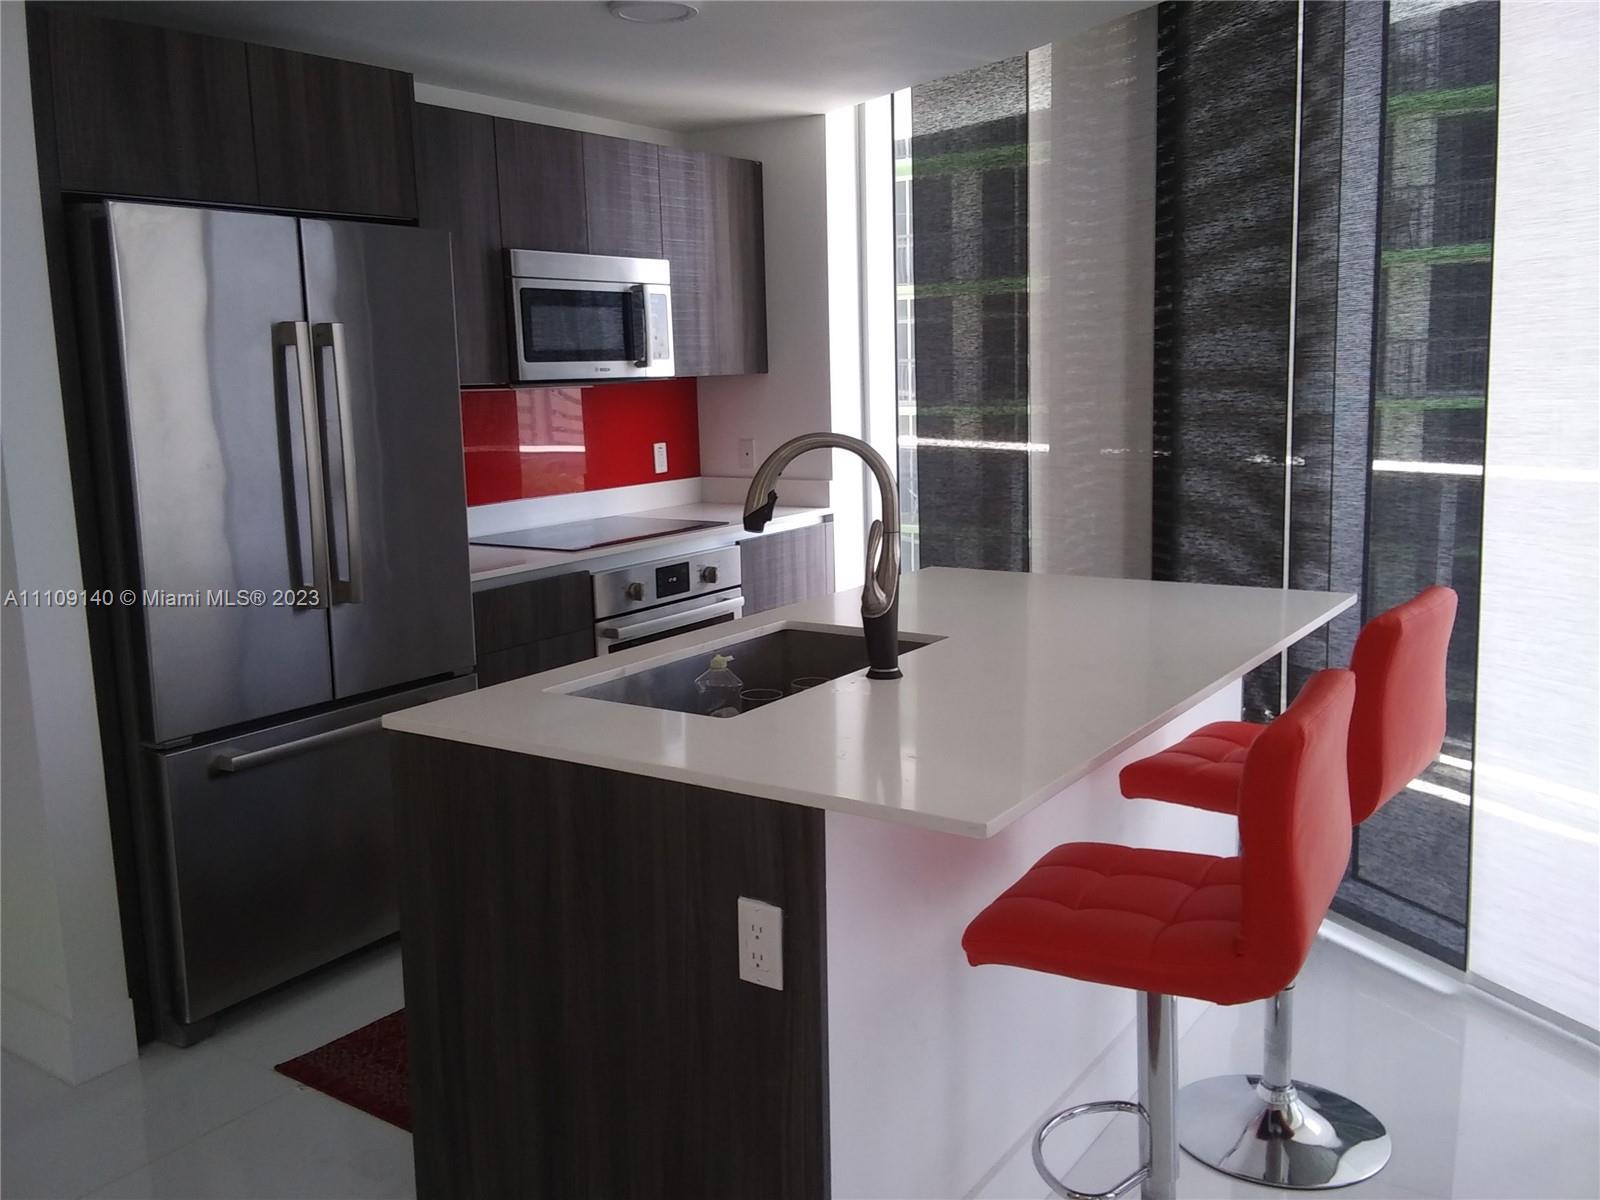 Fully remodeled  corner 2BED/2.5BATH  in one of Miami's most desirable luxury waterfront buildings.R